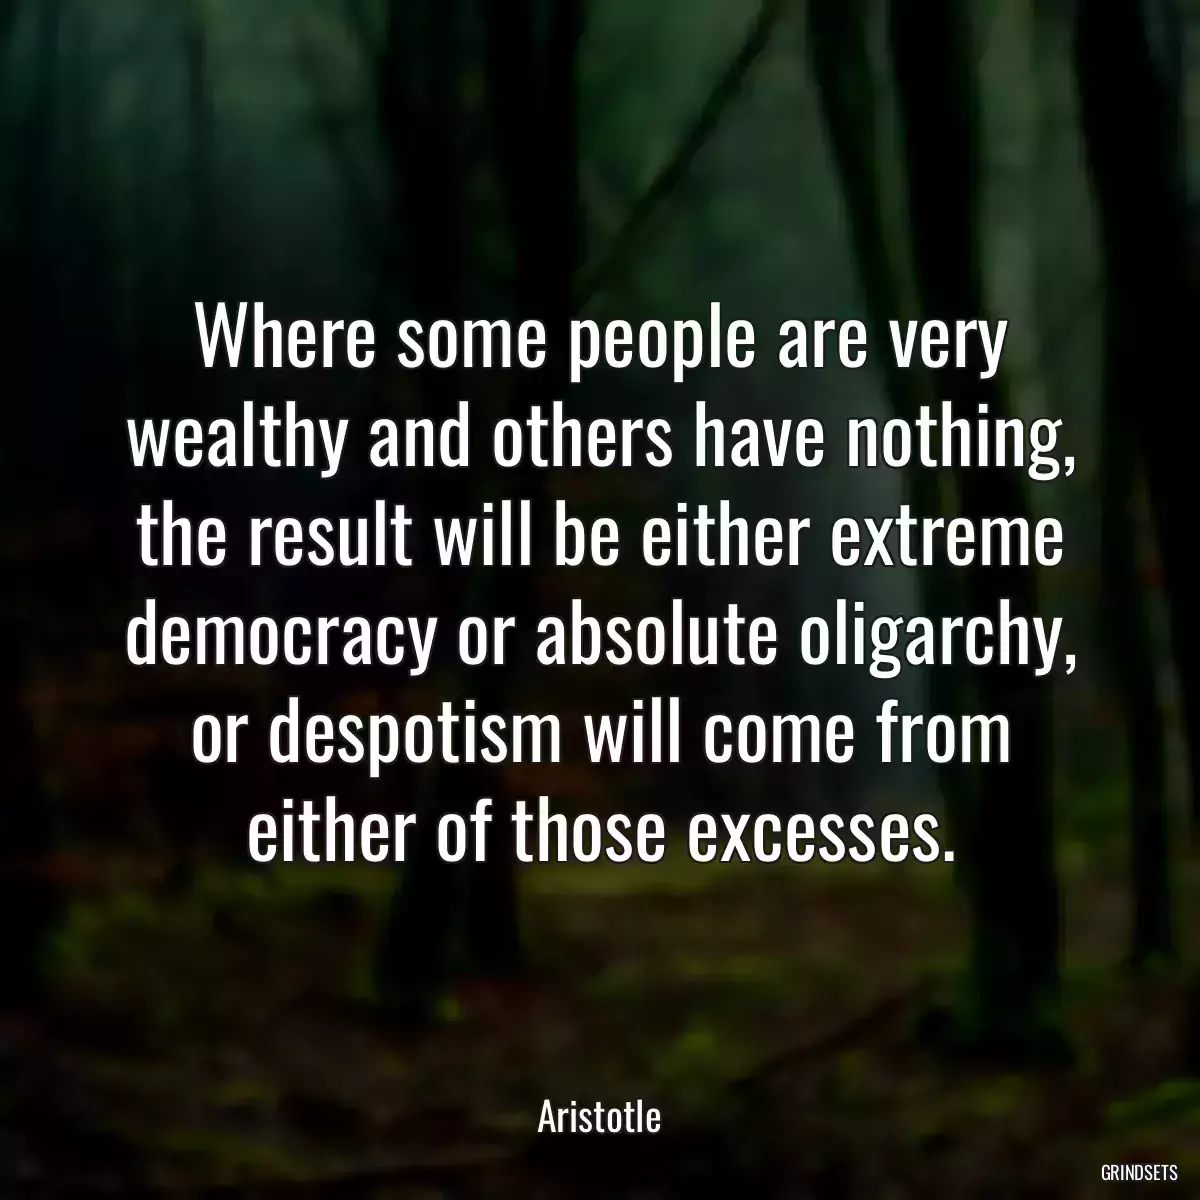 Where some people are very wealthy and others have nothing, the result will be either extreme democracy or absolute oligarchy, or despotism will come from either of those excesses.